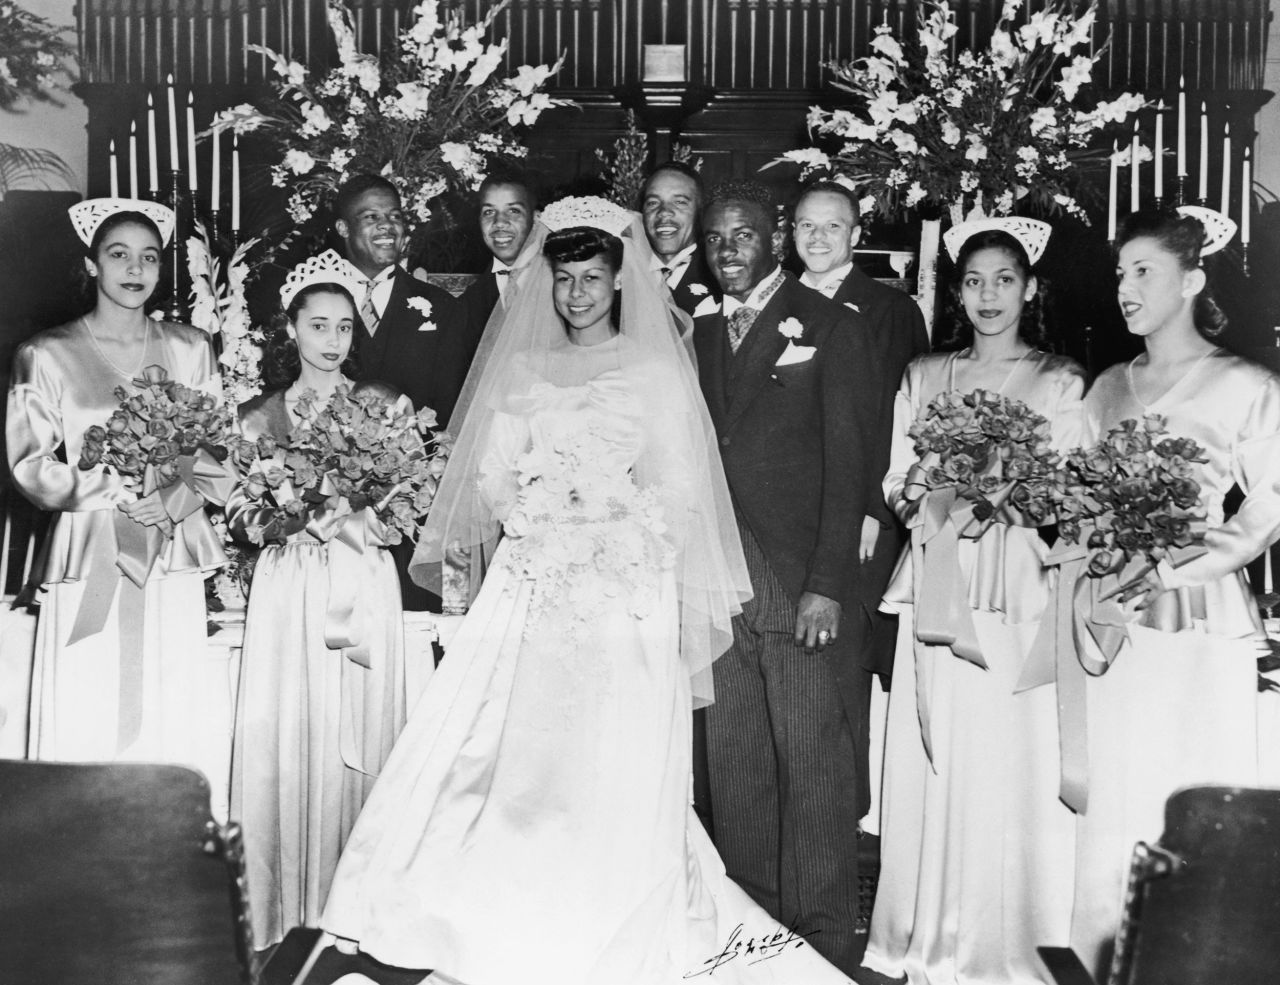 Robinson married Rachel Isum in Los Angeles in 1946. Throughout his life, she was his partner and sounding board, <a href="https://www.cnn.com/2016/04/08/entertainment/jackie-robinson-ken-burns-feat" target="_blank">a steady companion</a> when he was the subject of criticism and worse.